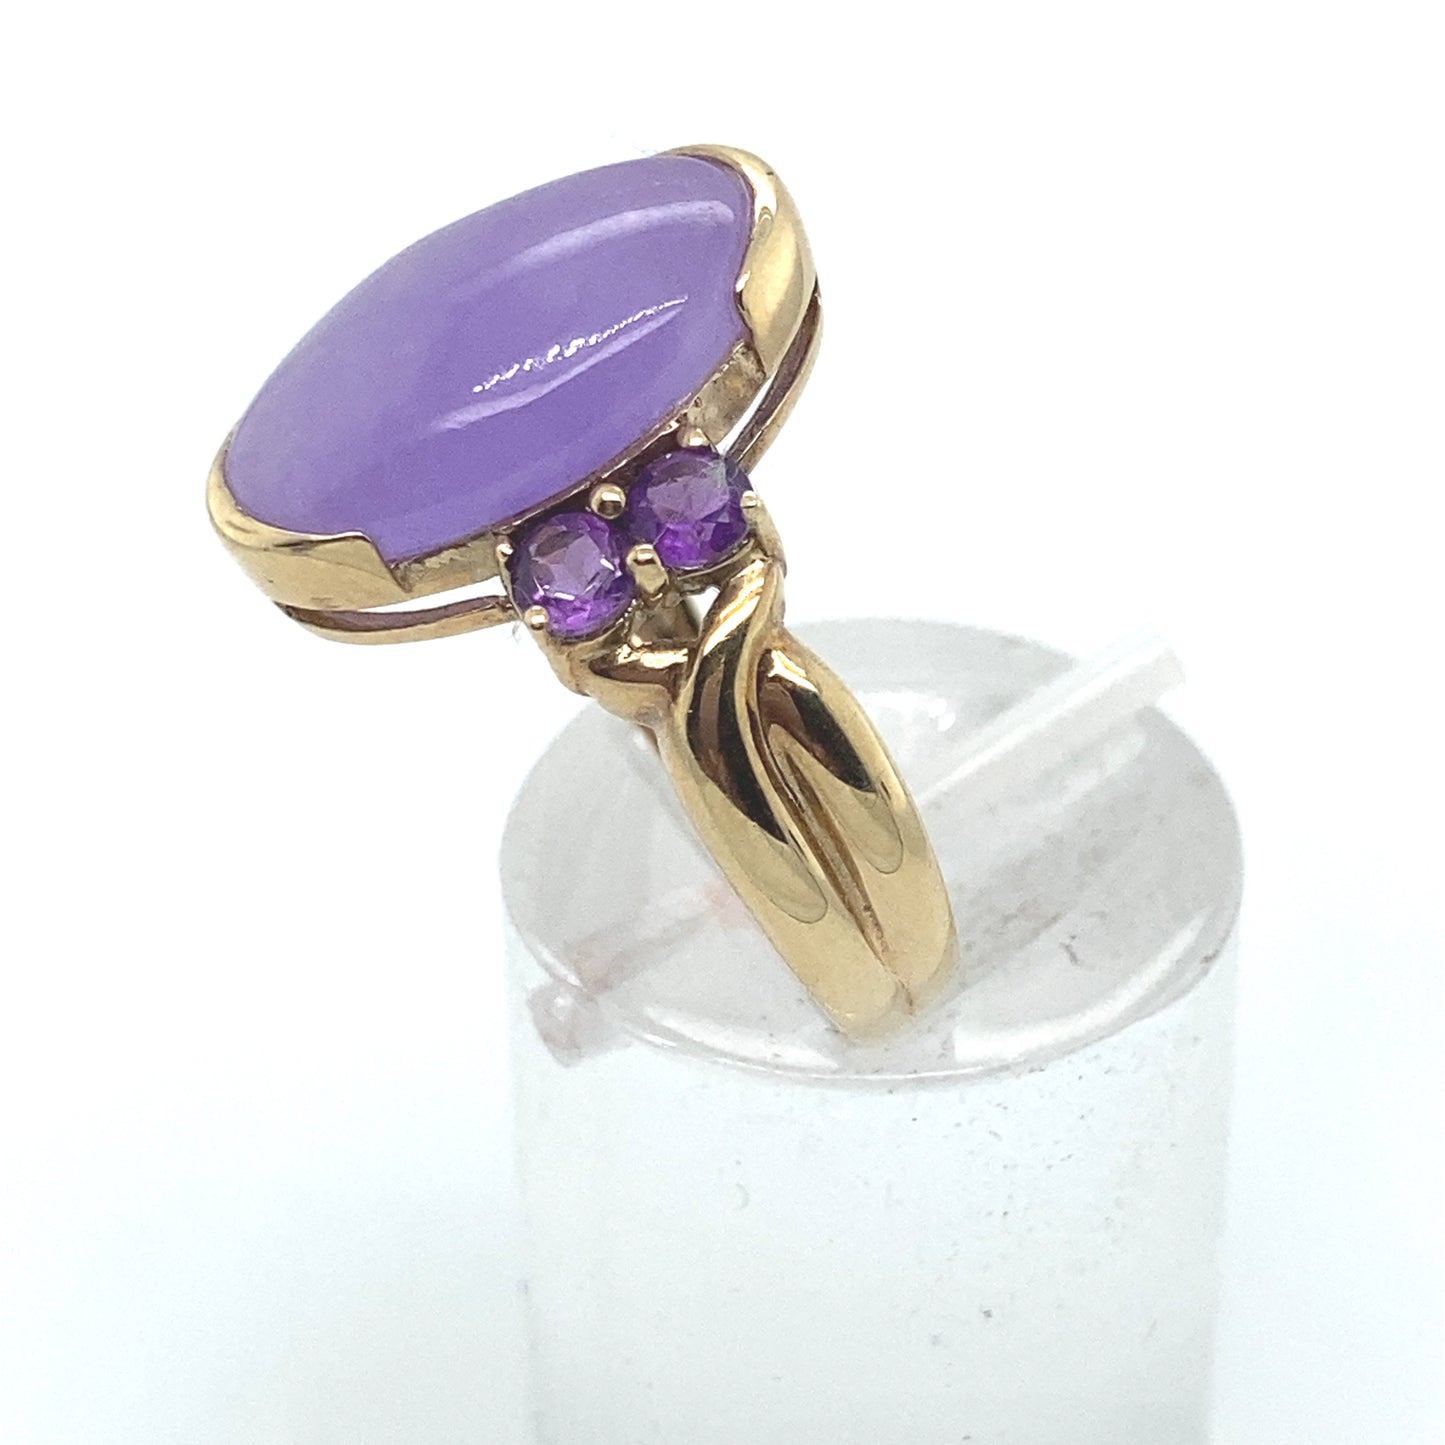 14k yellow gold lavender color jade ring with 4 small Amethyst stones.